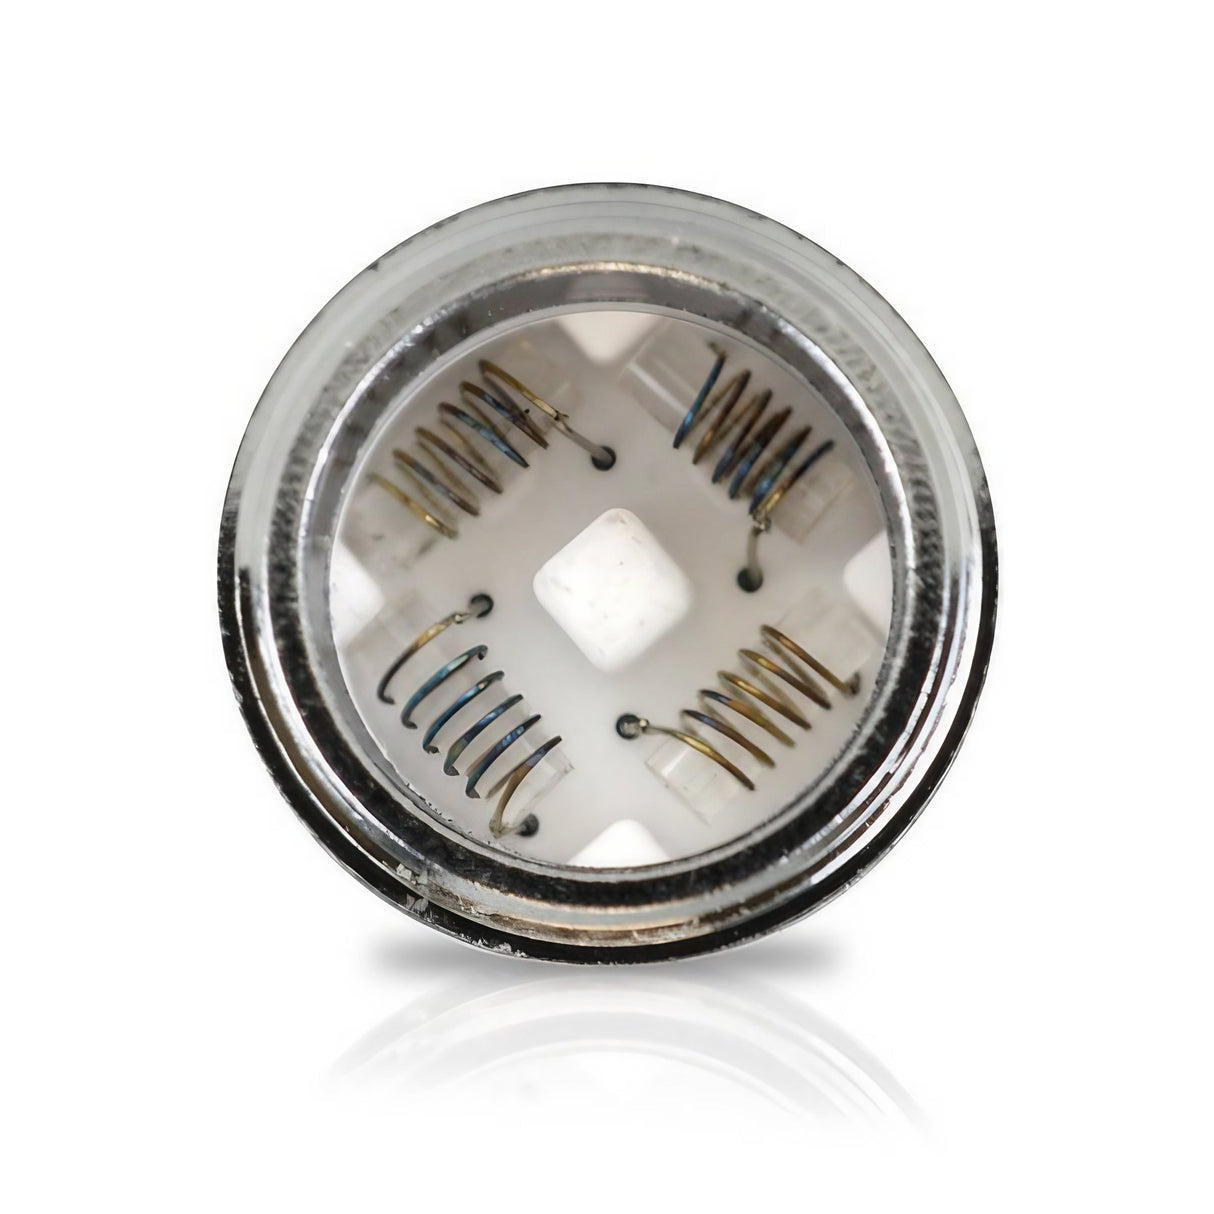 Yocan Evolve Plus XL Replacement Coil 5 Pack, quartz e-nail design, top view on white background